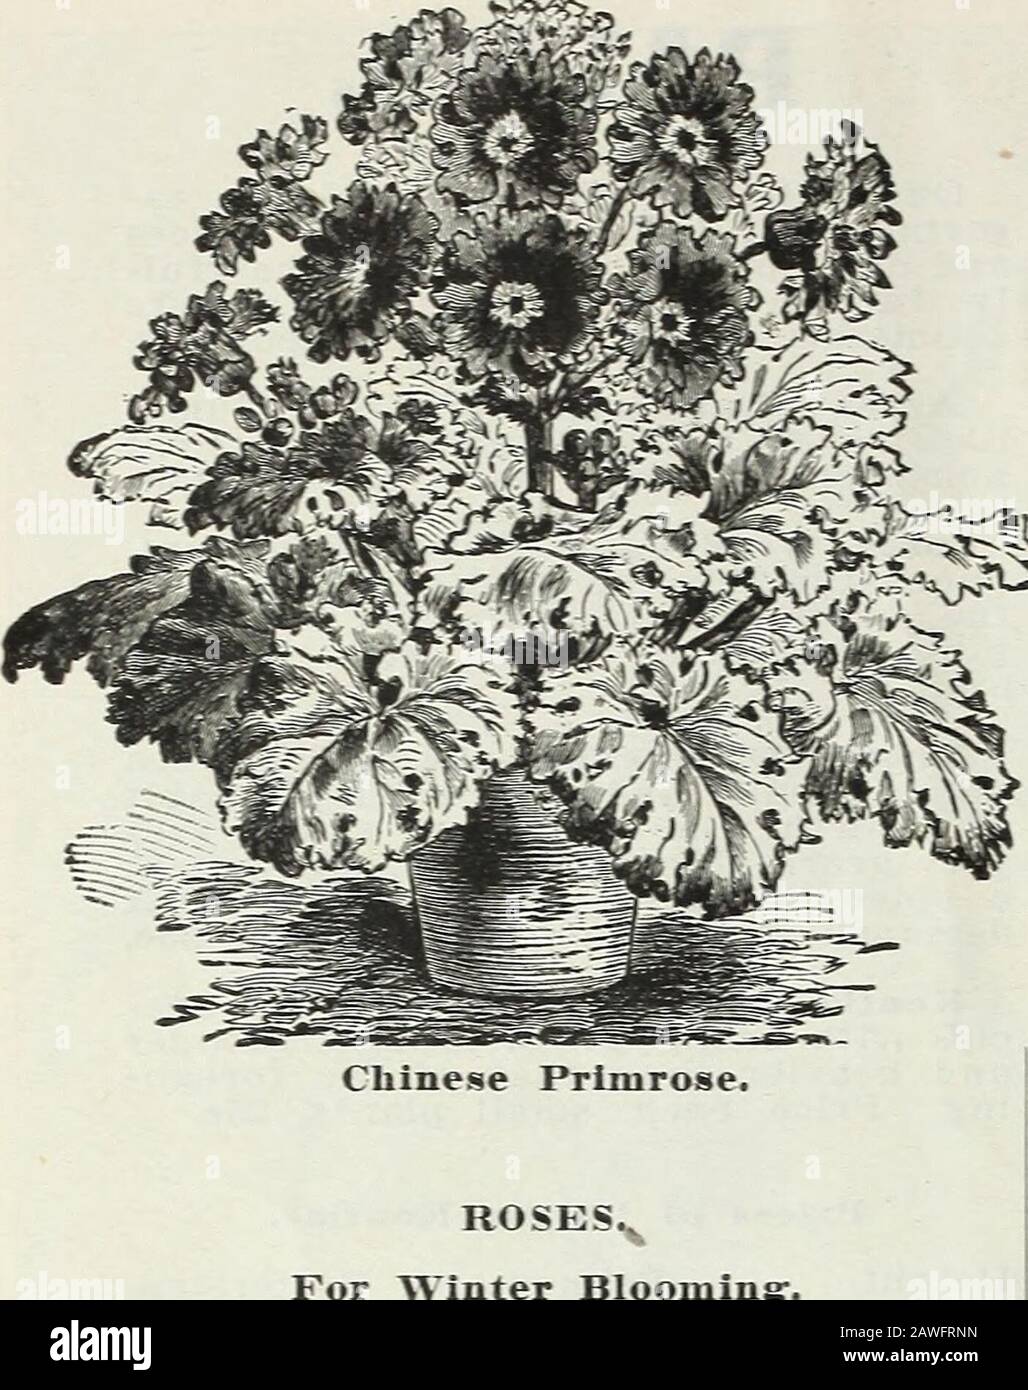 Bulbs and plants : autumn 1906 . Pandnnus Utilis. CURRIE BROS. CO.. MILWAUKEE, WIS.. PRIMULA. A very popular genus of plants, un-surpassed for parlor and conservatorydecoration, and for supplying cut flow-ers in winter. Chinese Single—We offer a largestock and magnificent strain of all va-rieties in white, pink, red, blue andblotched; very beautiful. Each, 25c. Obconica Grandiflora—An excellent*.^1Viw^s, house plant, blooms continually, sup-r^v^-^-vxL plying great quantities of pretty, deli-neate looking flowers, admirable for cut-ting. Color white, with a slight tingeof lilac. Each, 15c to 25 Stock Photo